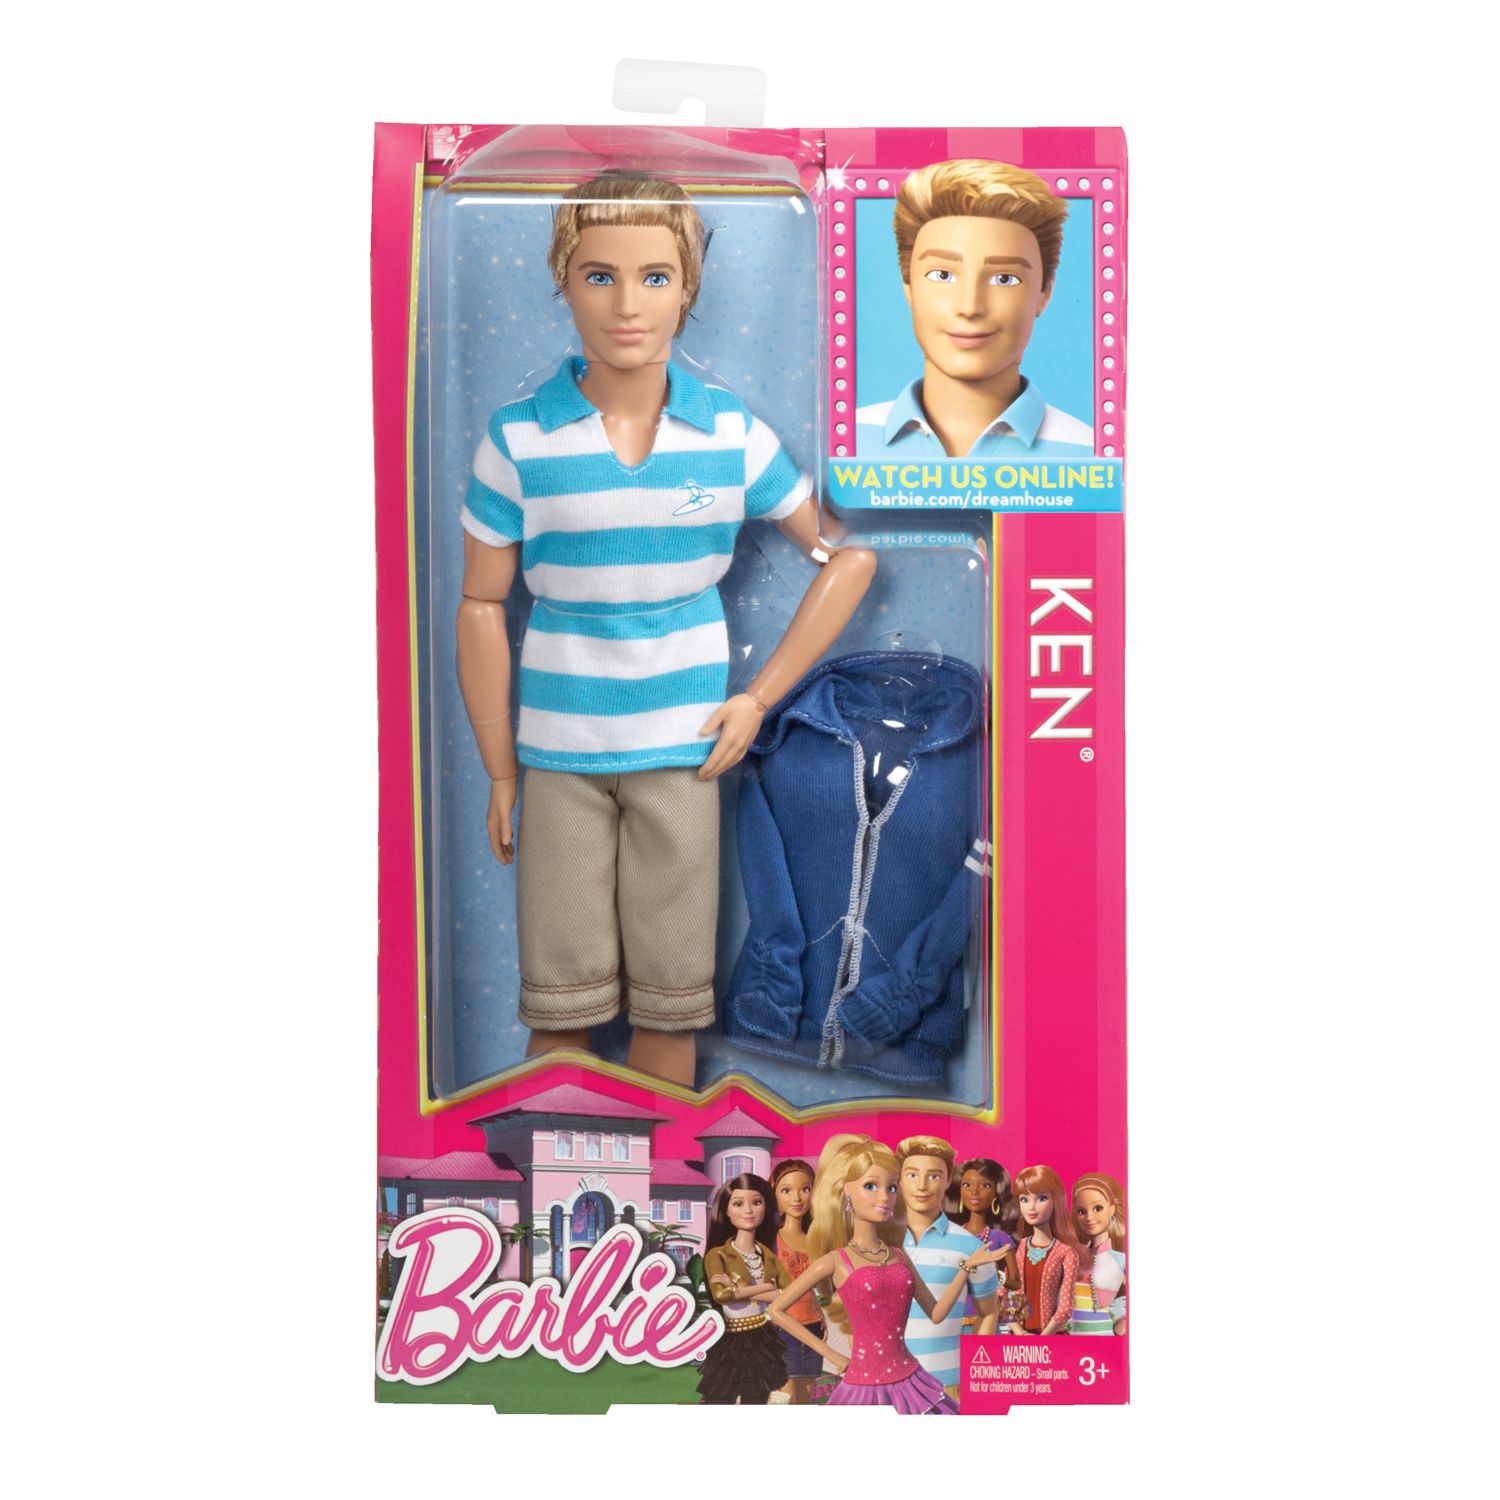 barbie life in the dreamhouse toy